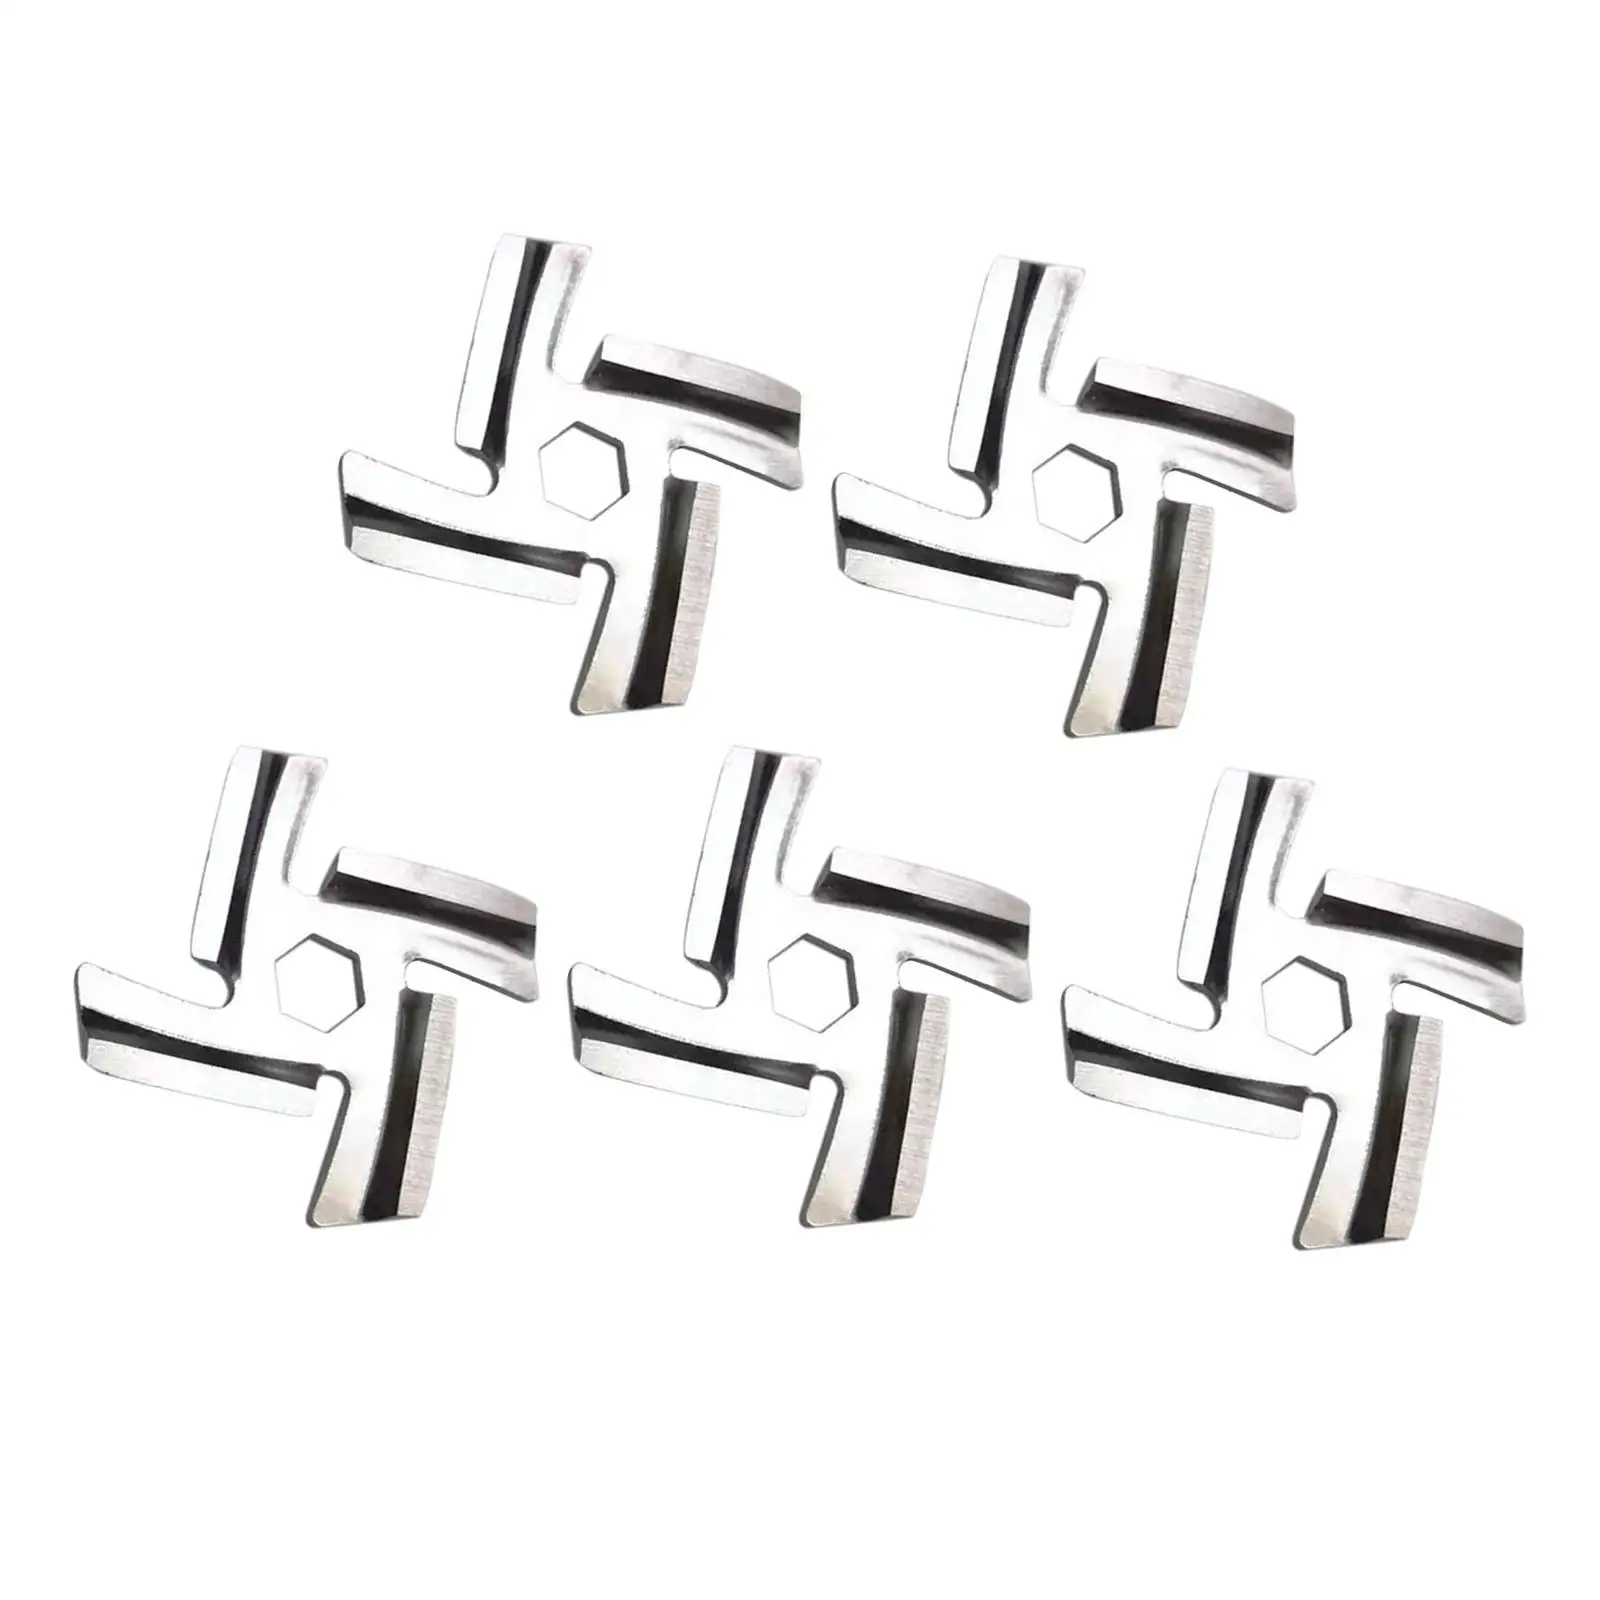 5x Replacement Meat Grinder Blade 0.33inch Food Grinder Blade Cutter for Meat Grinder Stand Mixers Fits Kitchen